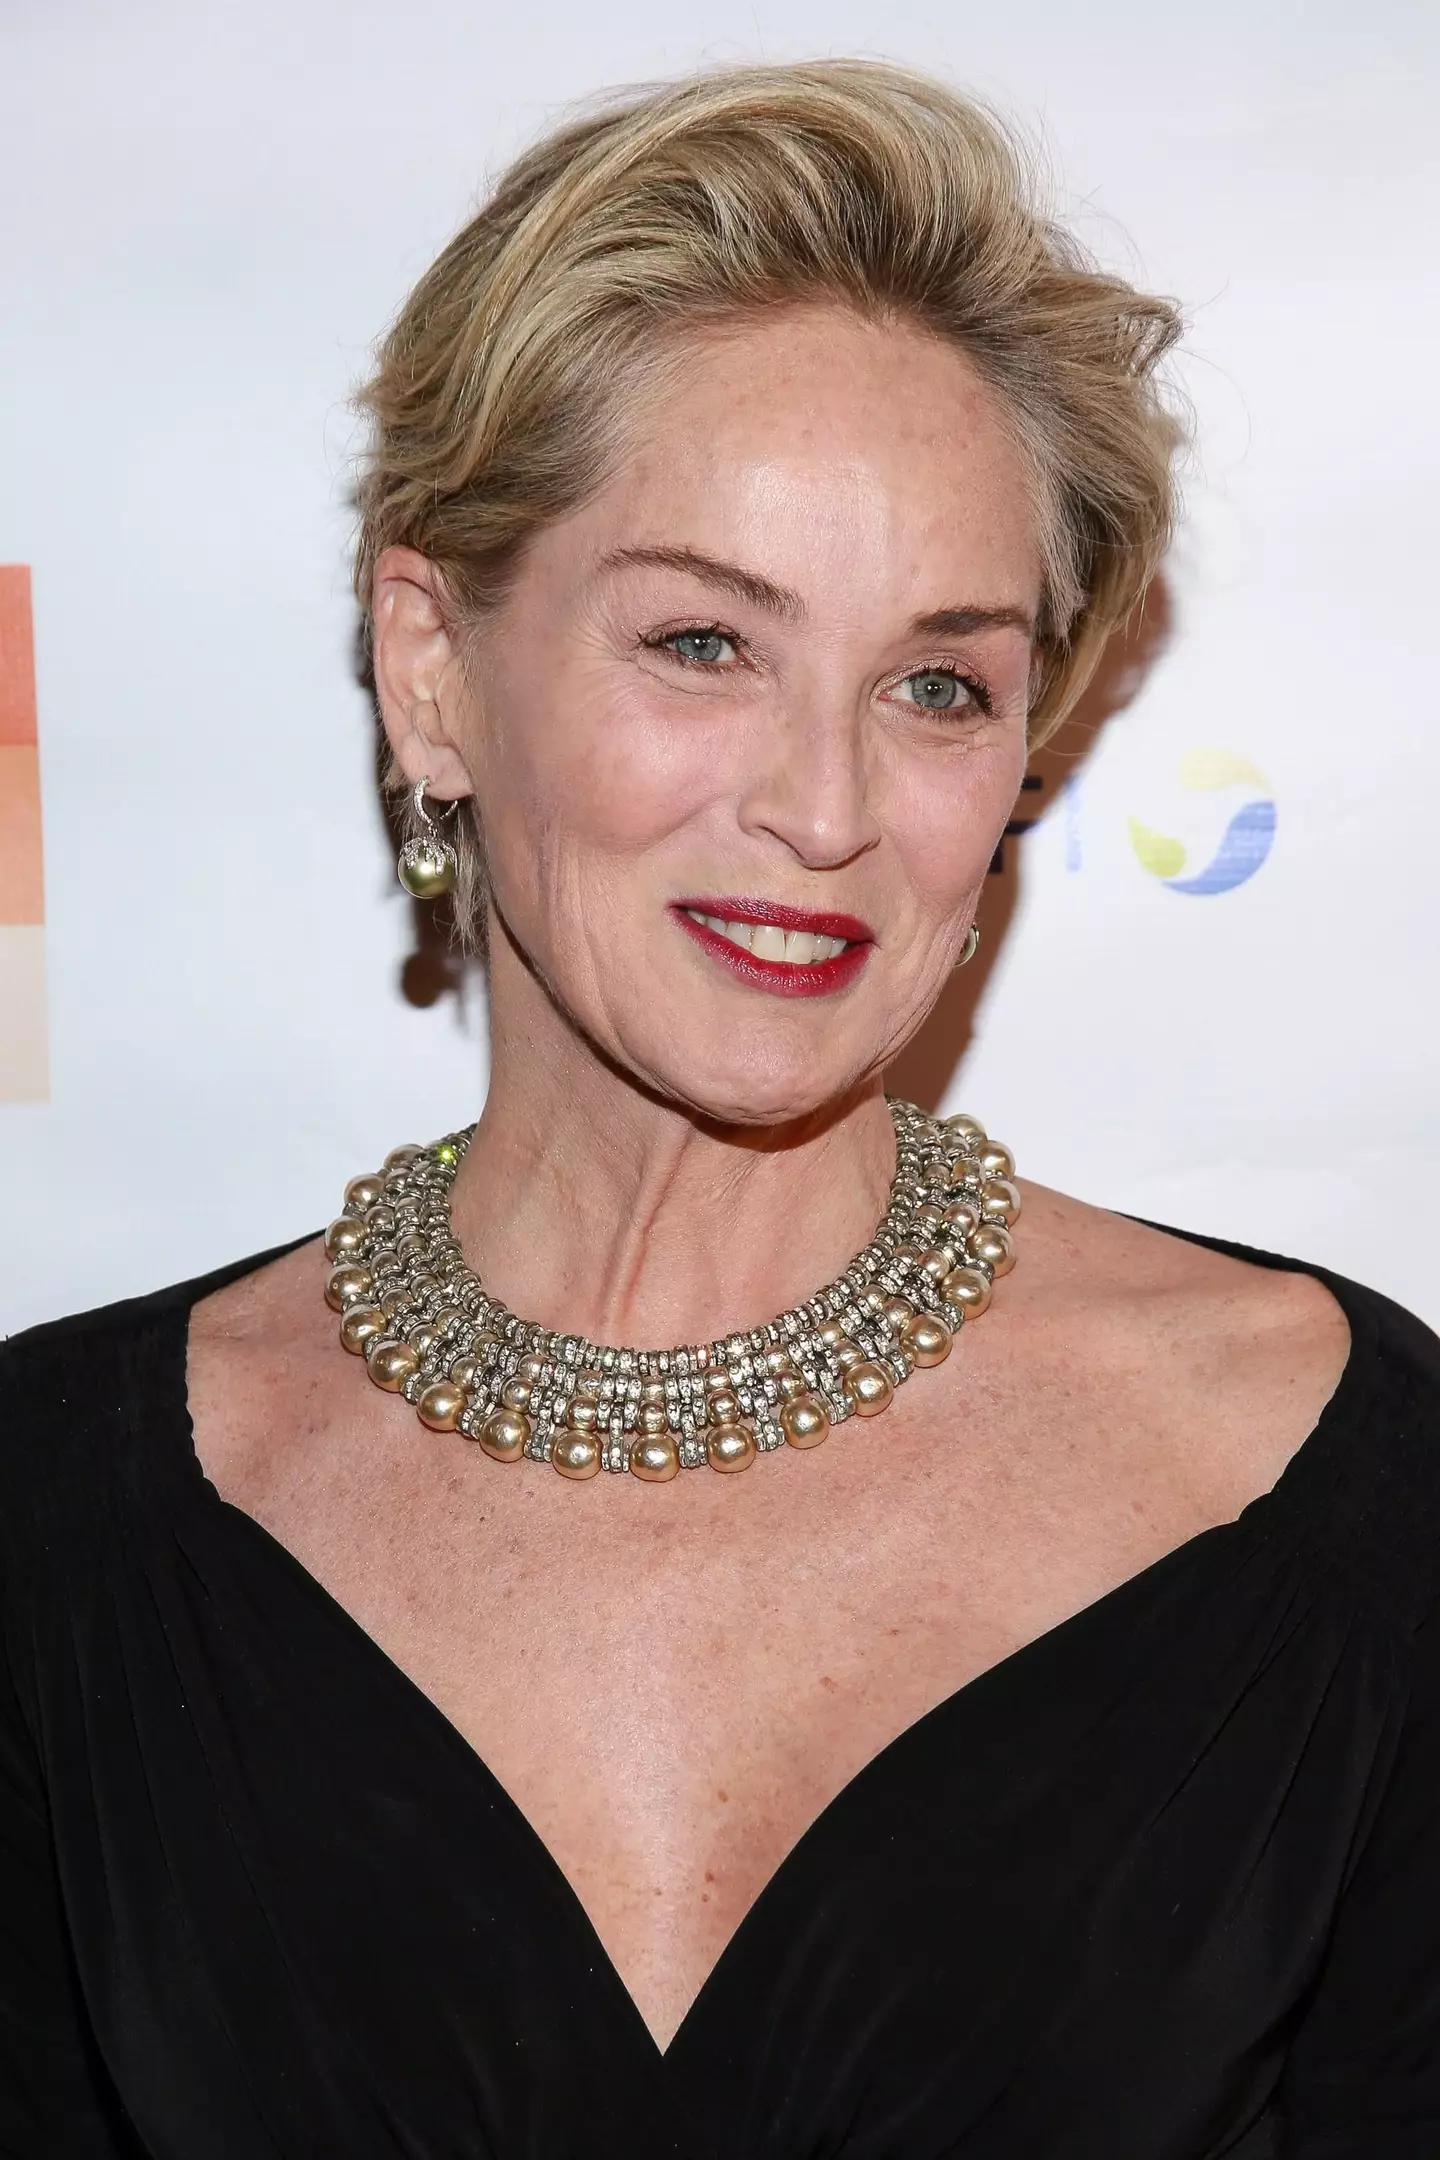 Sharon Stone's ex-boyfriend became 'no longer interested' in her after she refused to get Botox.